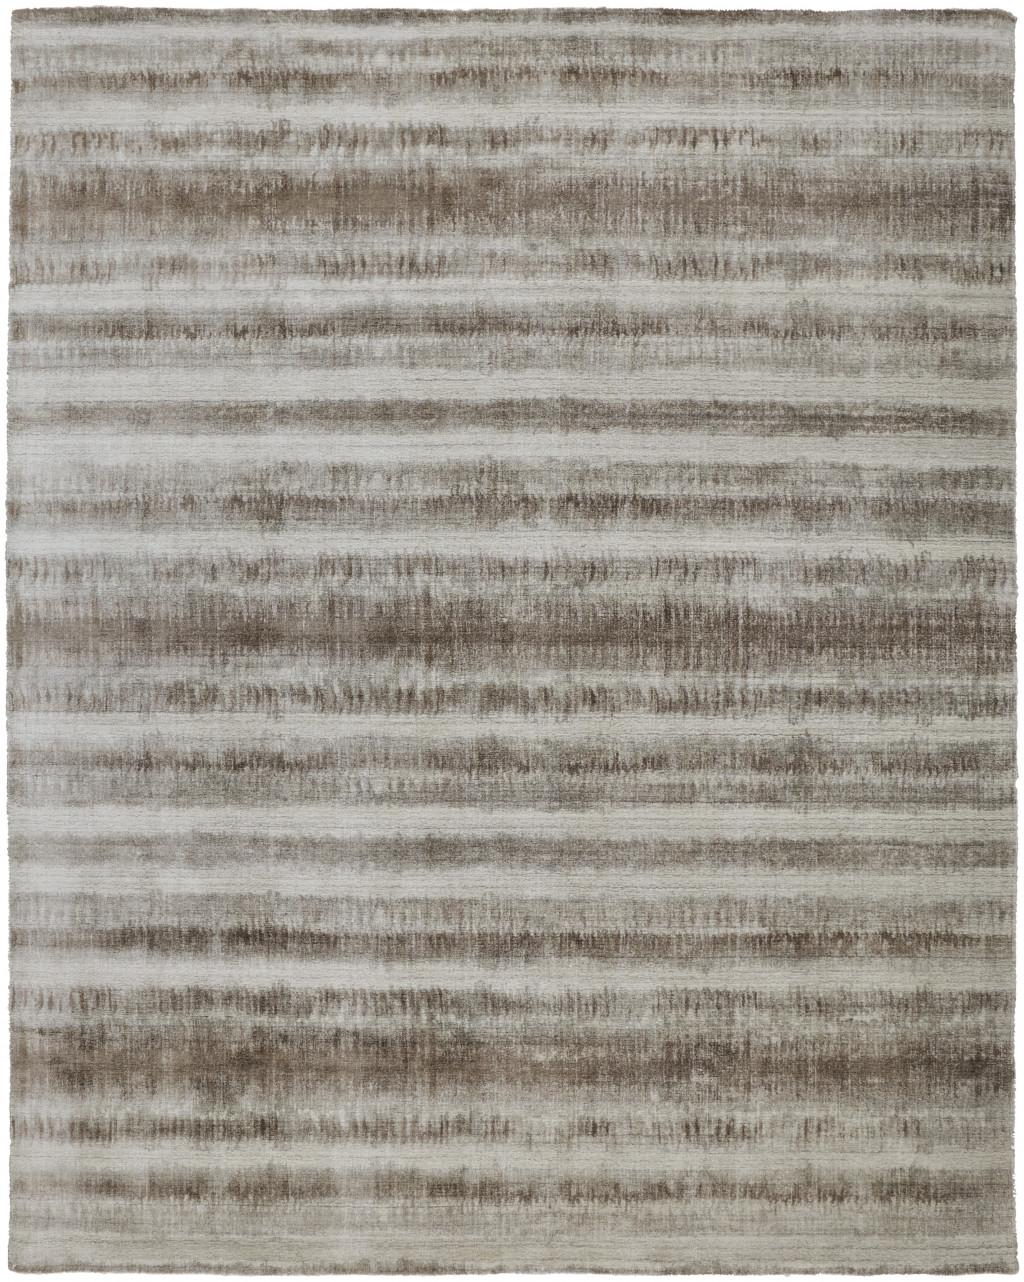 5' X 8' Tan Ivory And Brown Abstract Hand Woven Area Rug-514436-1